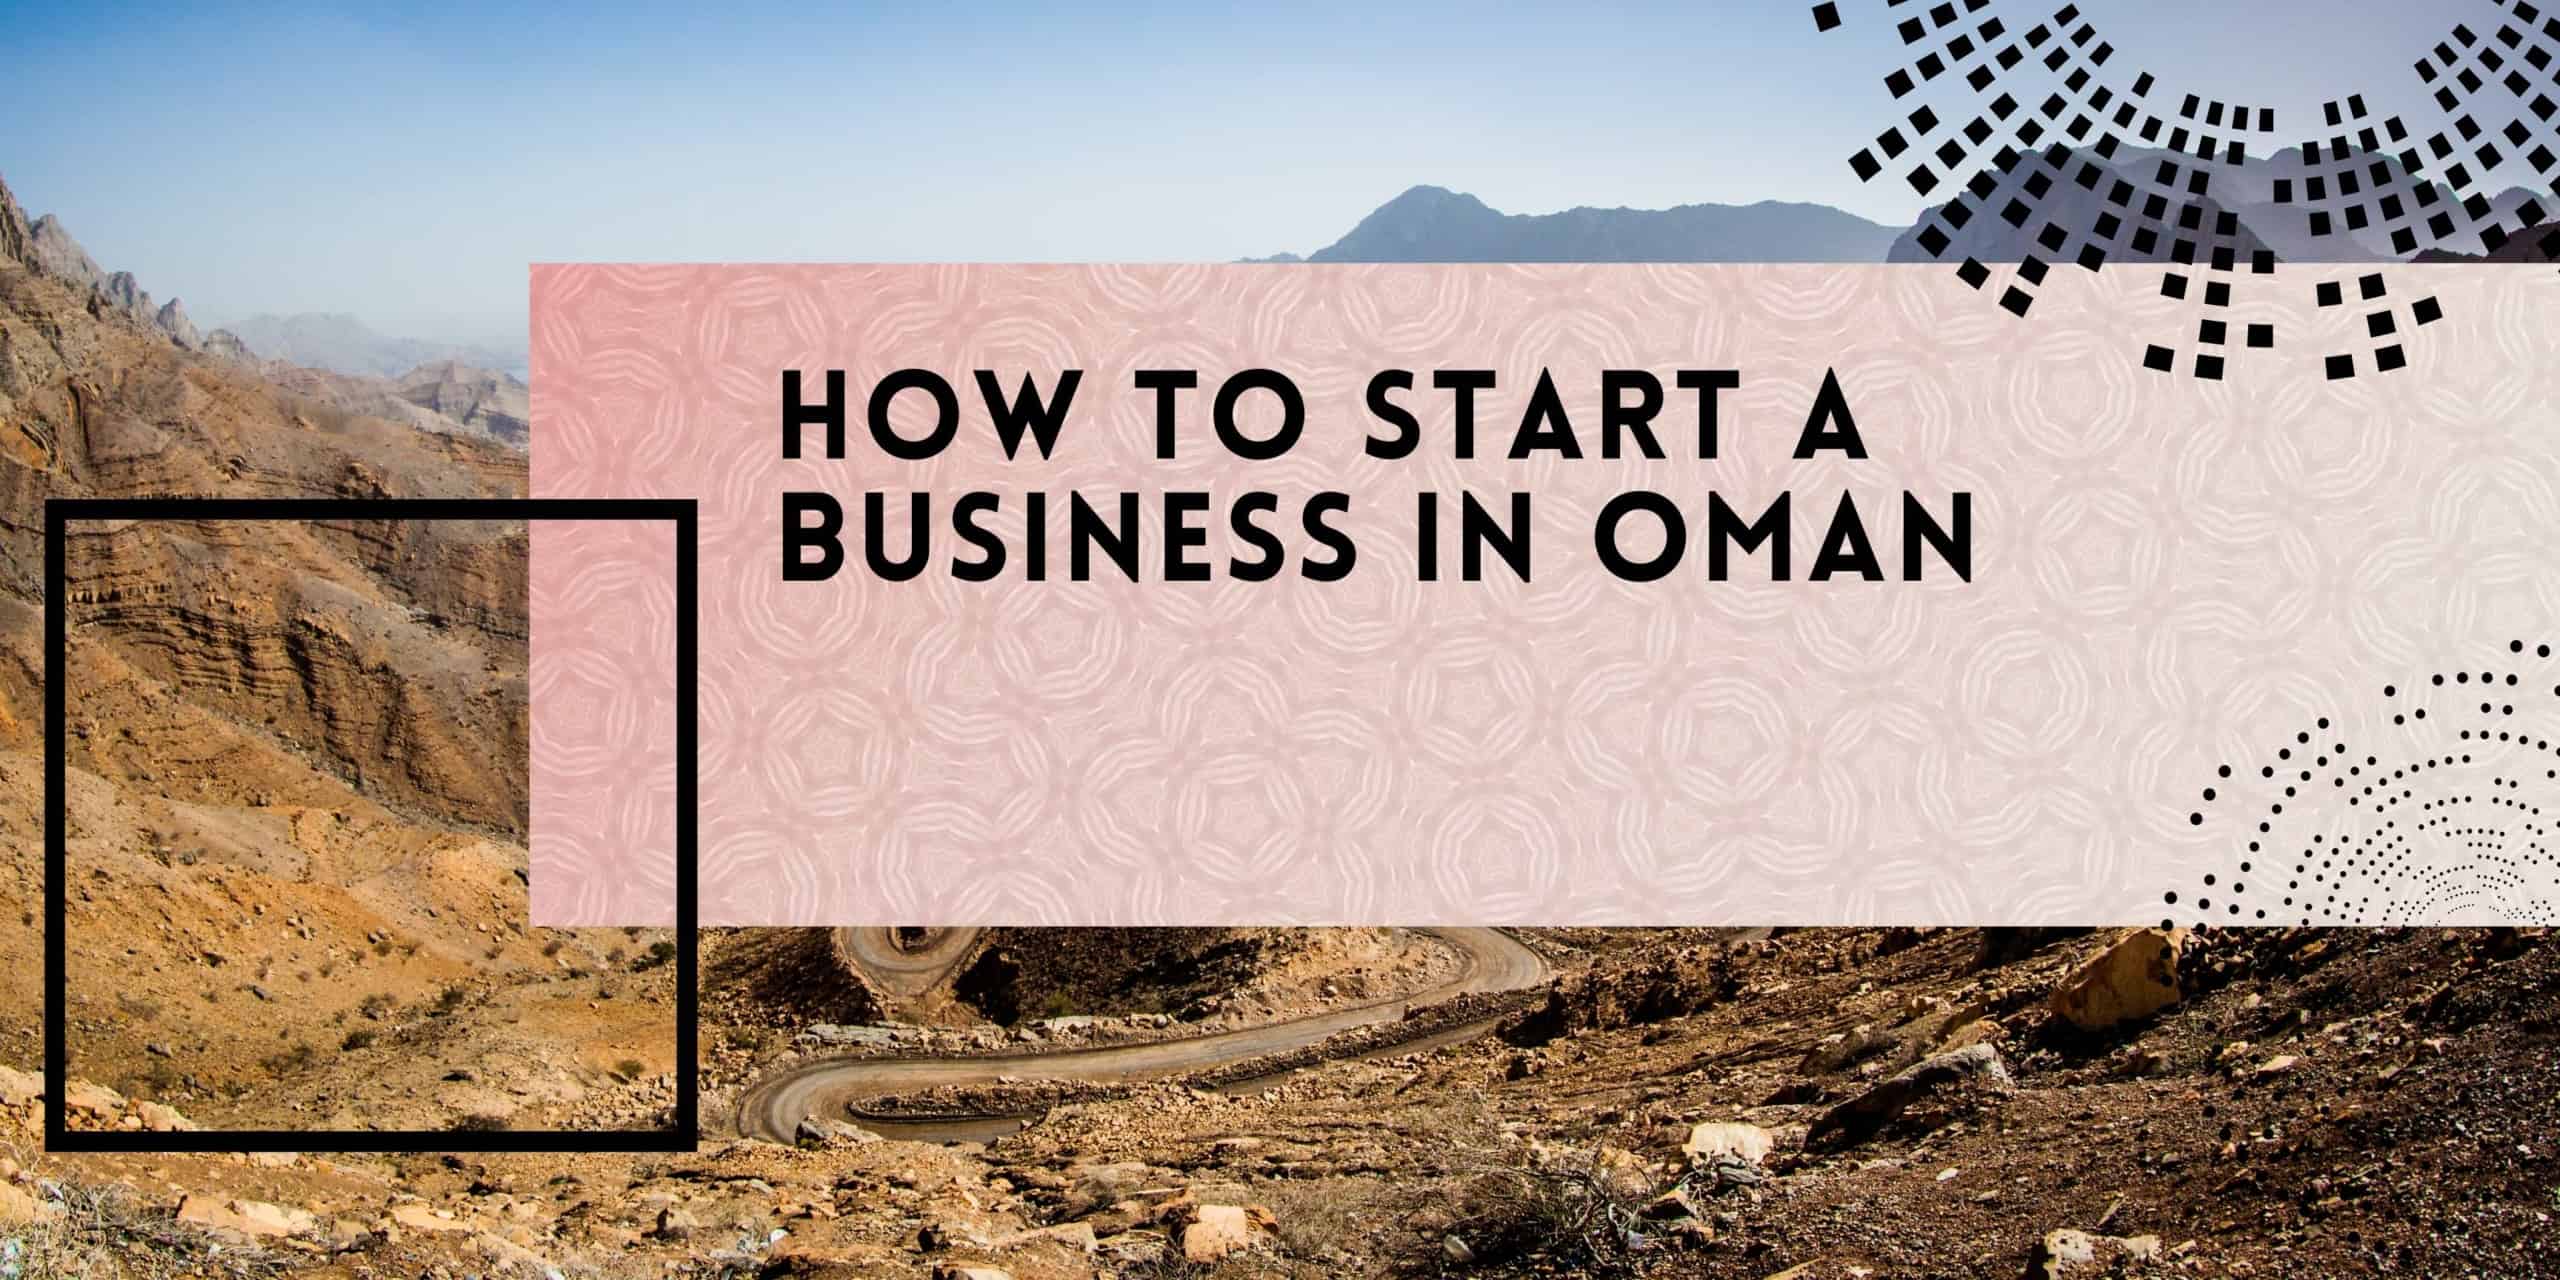 How to Start a Business in Oman